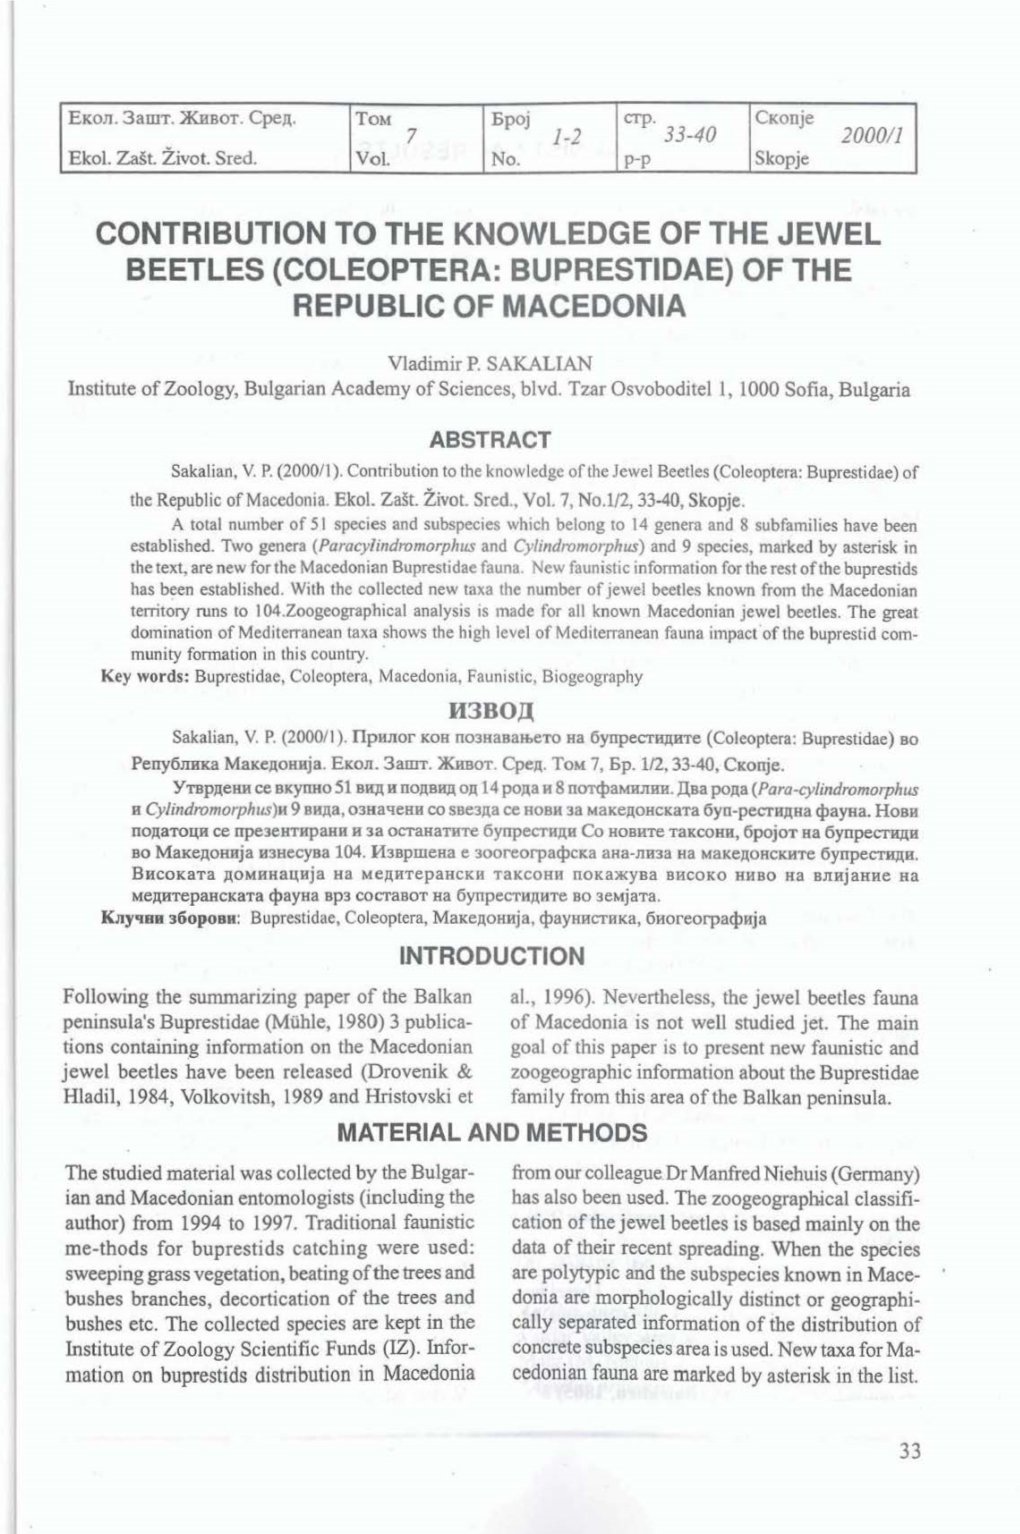 Contribution to the Knowledge of the Jewel Beetles (Coleoptera: Buprestidae) of the Republic of Macedonia